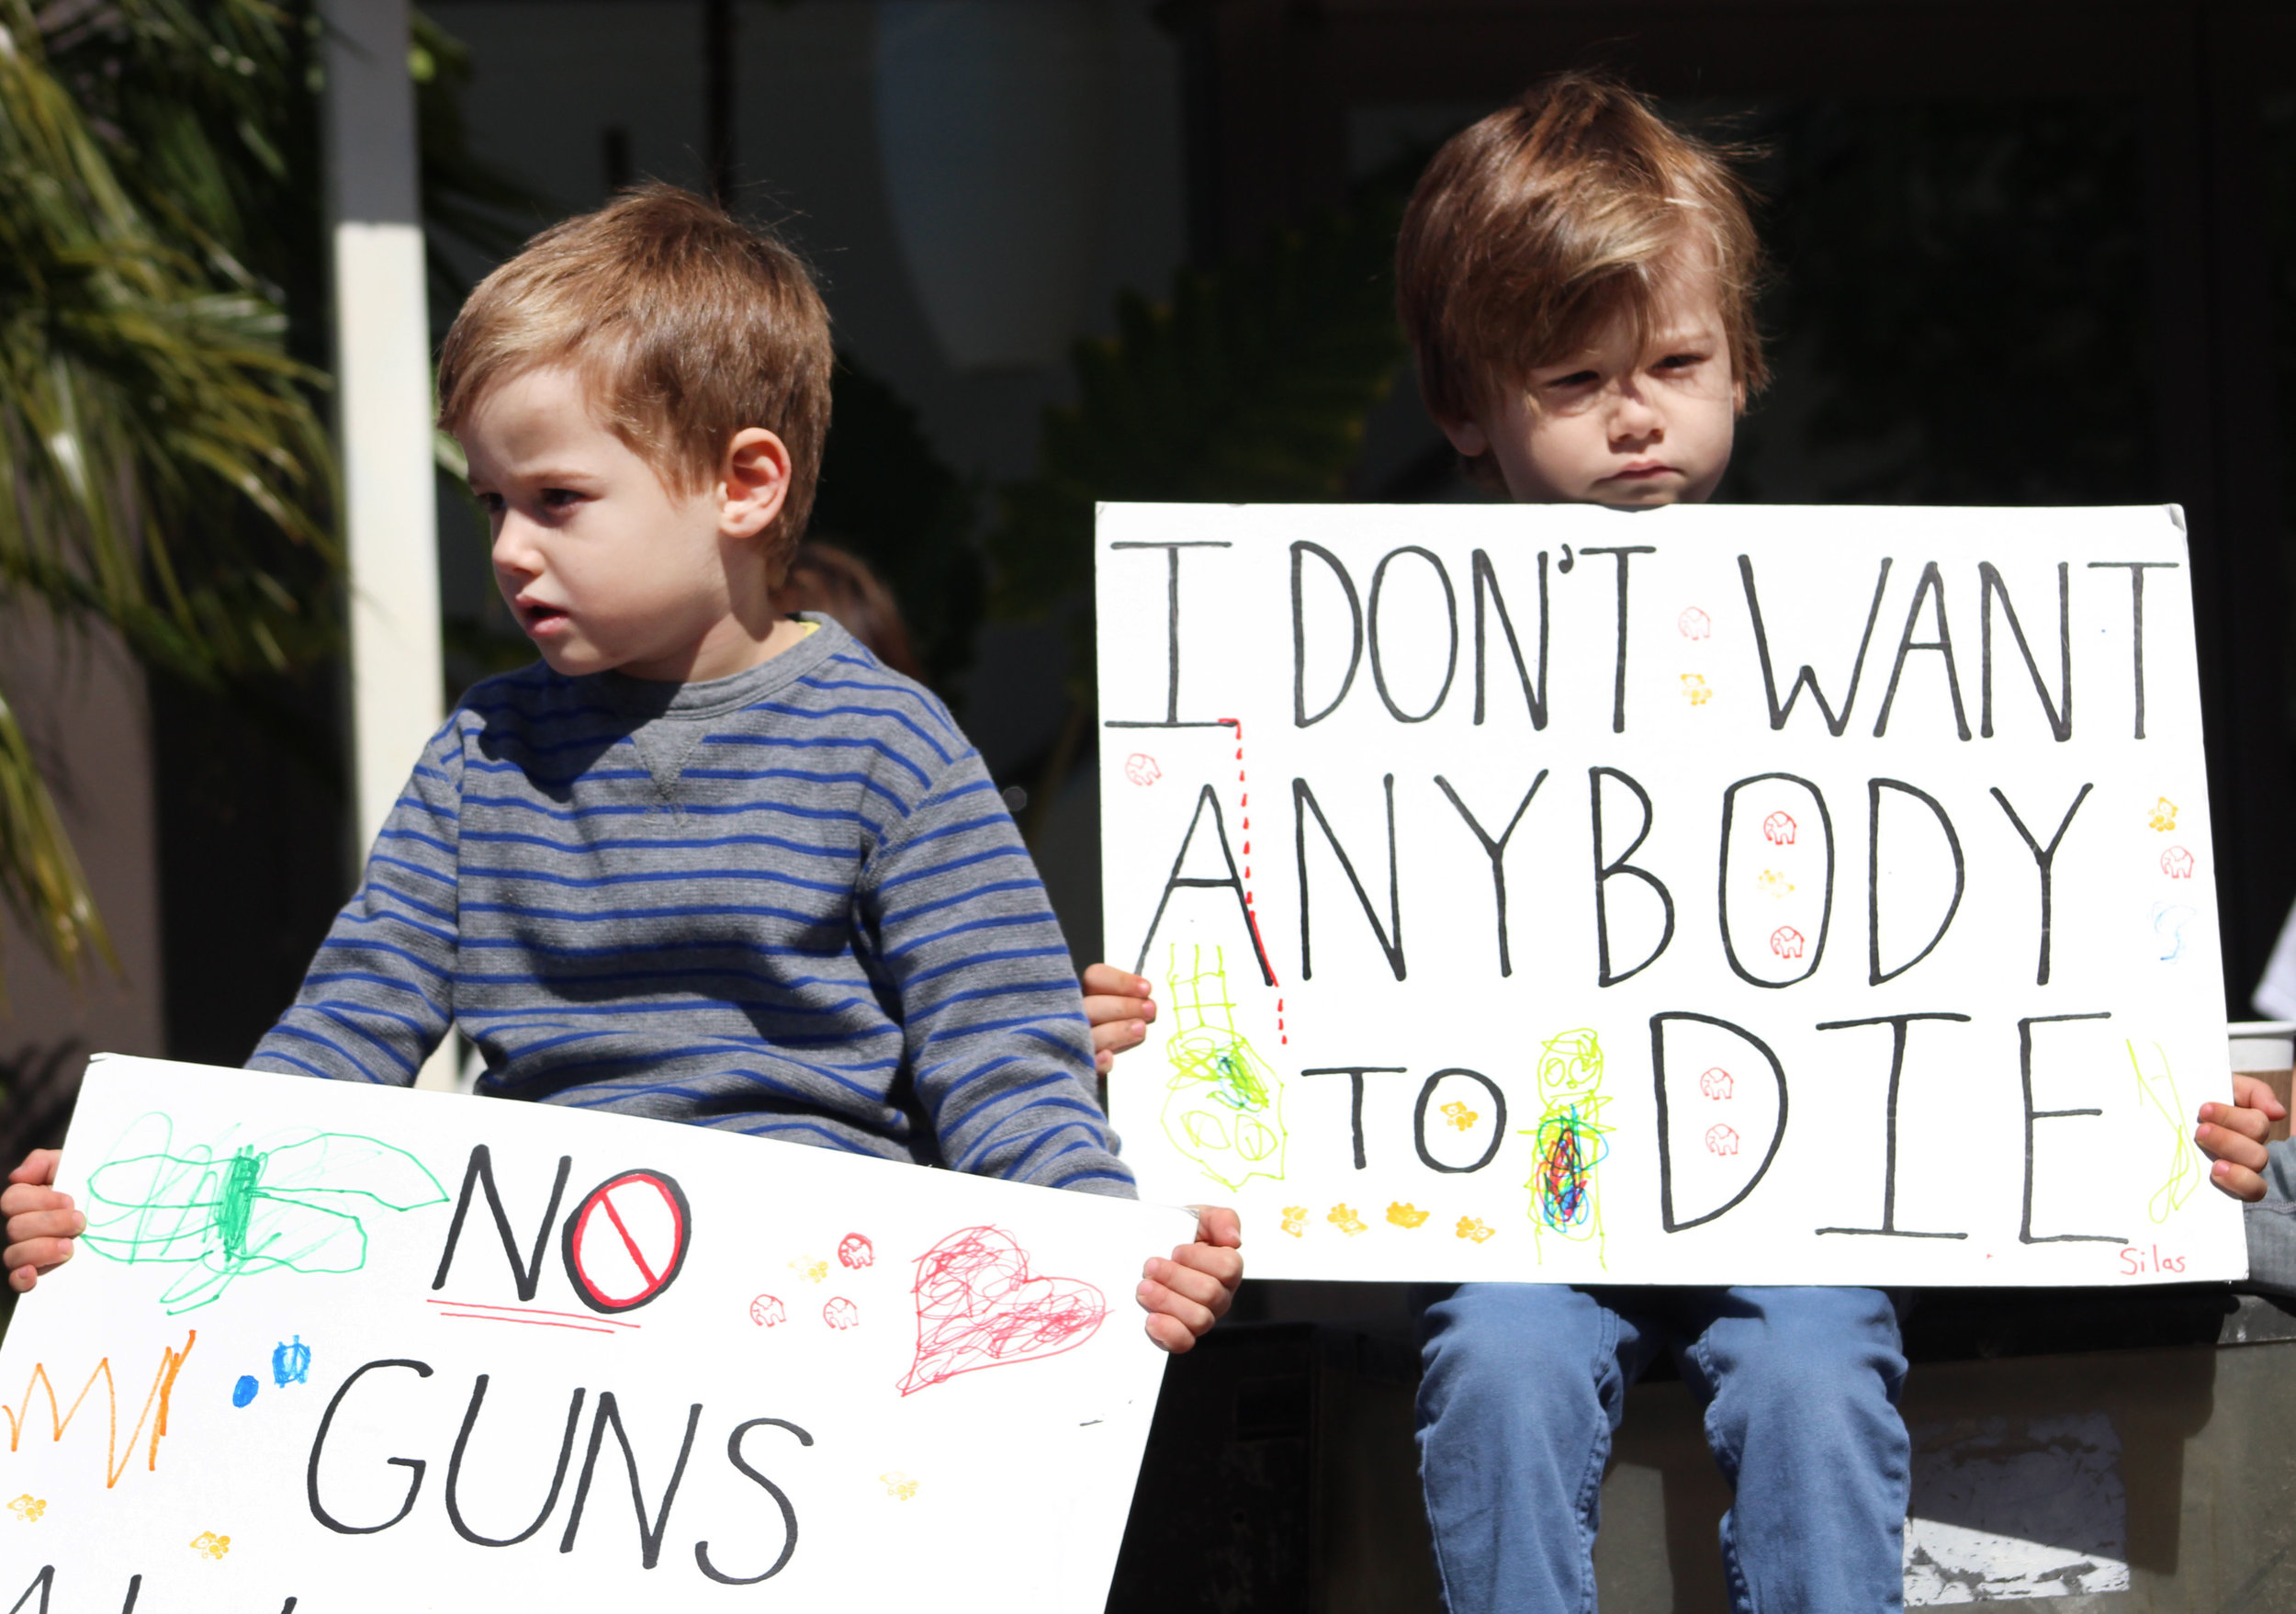  The brothers Wyatt (left) and Silas (right) Doskow sit and watch the crowd of protestors make their way back up Montana Avenue during the March for Our Lives protest. Saturday,&nbsp;March 24, 2018, in Santa Monica, California. (Pyper Witt/Corsair Ph